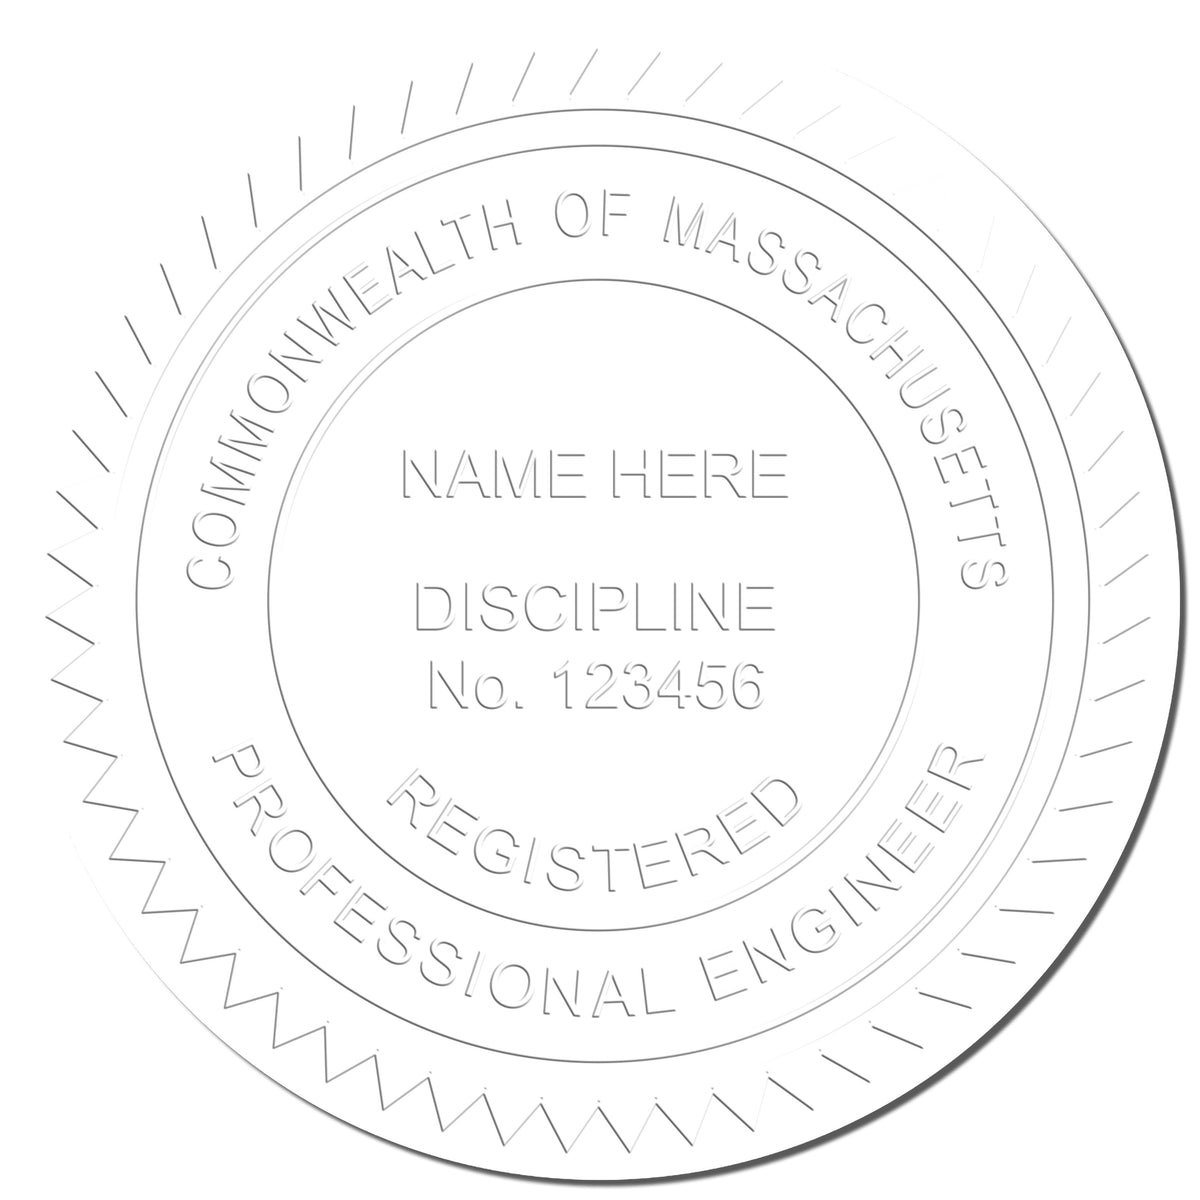 The Soft Massachusetts Professional Engineer Seal stamp impression comes to life with a crisp, detailed photo on paper - showcasing true professional quality.